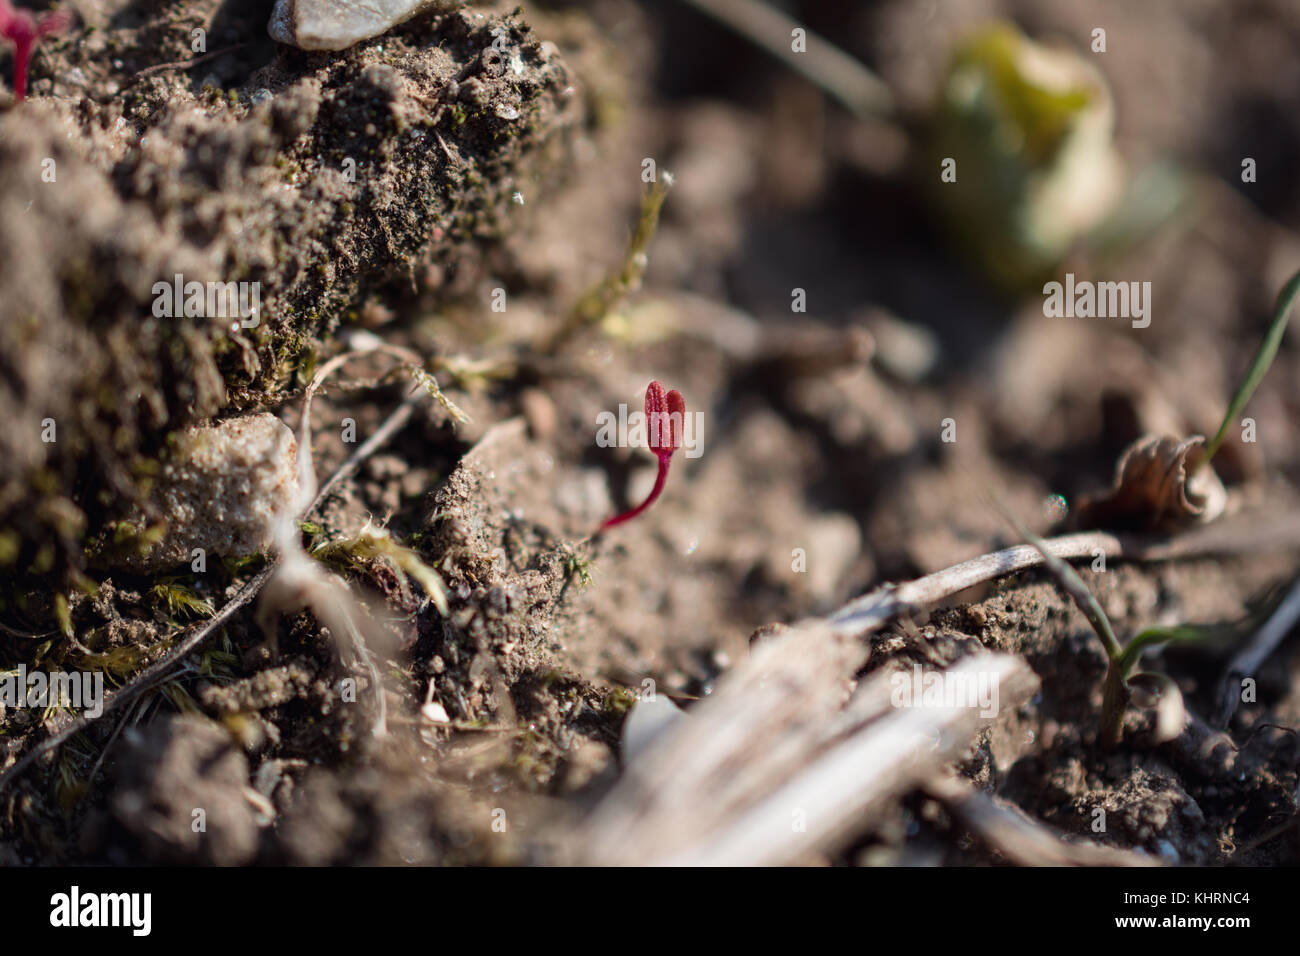 Close-Up Of Tiny Red Sprout Of Plant Stock Photo